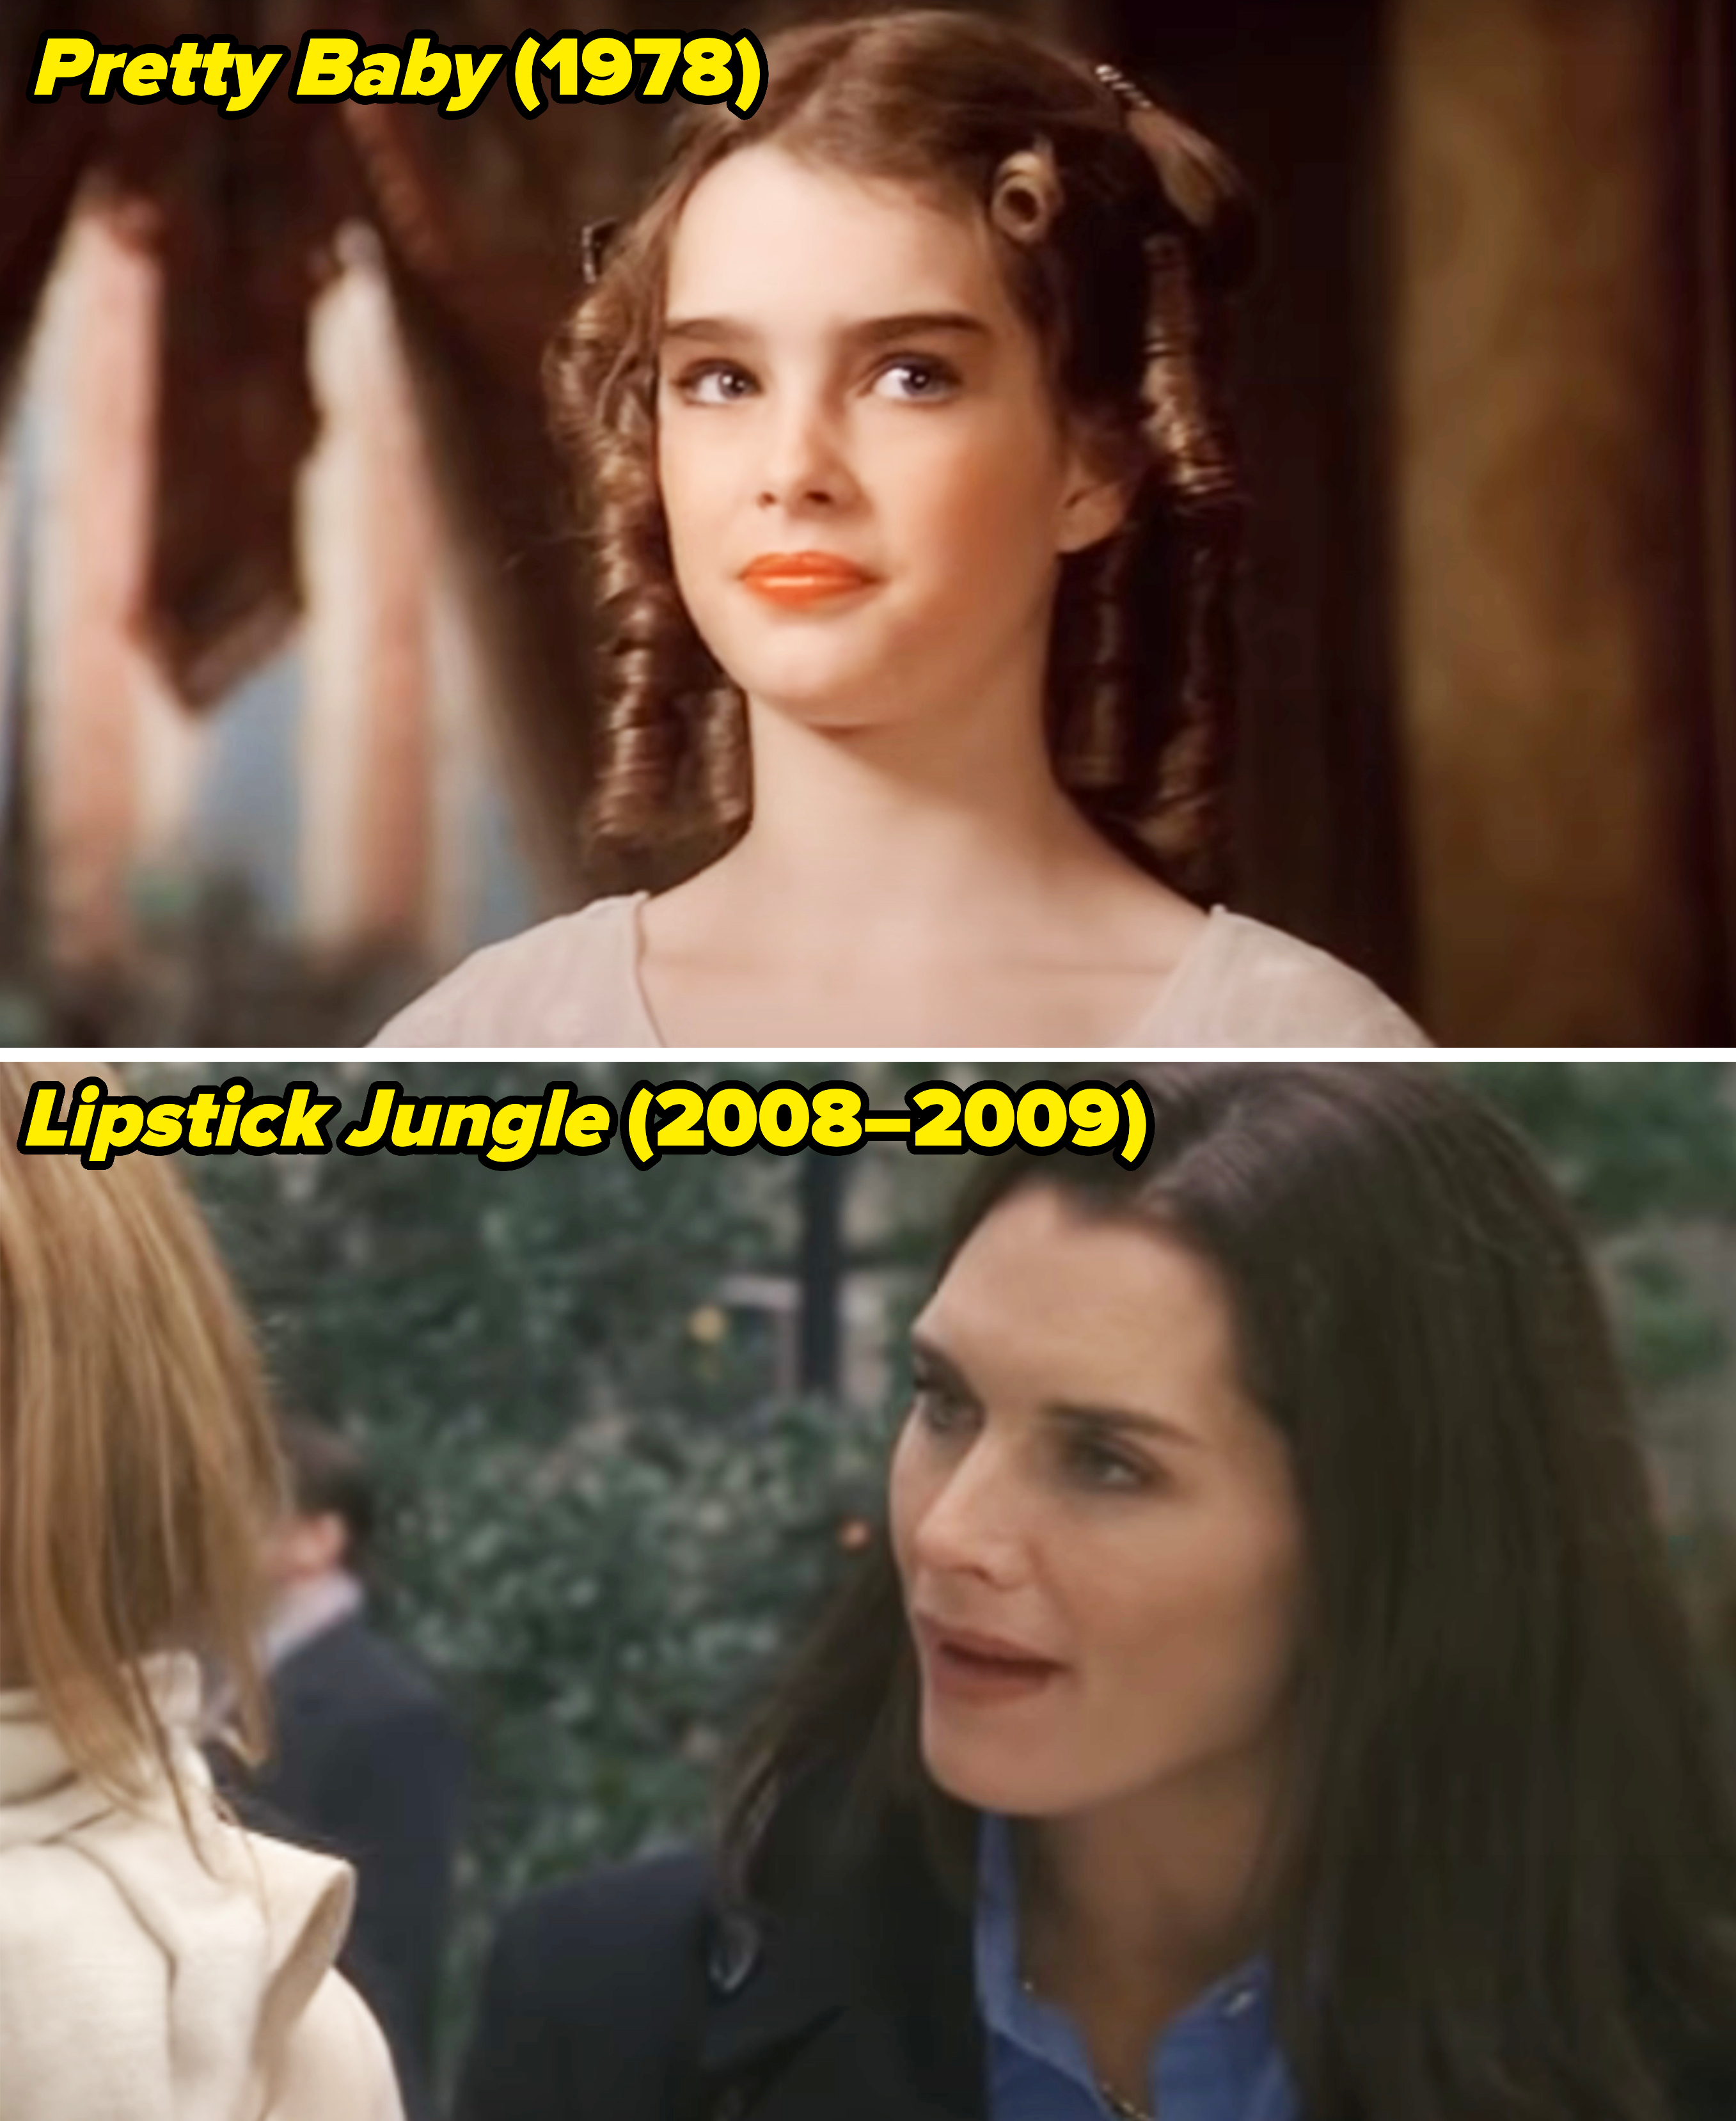 closeup of her in pretty baby and then later in lipstick jungle